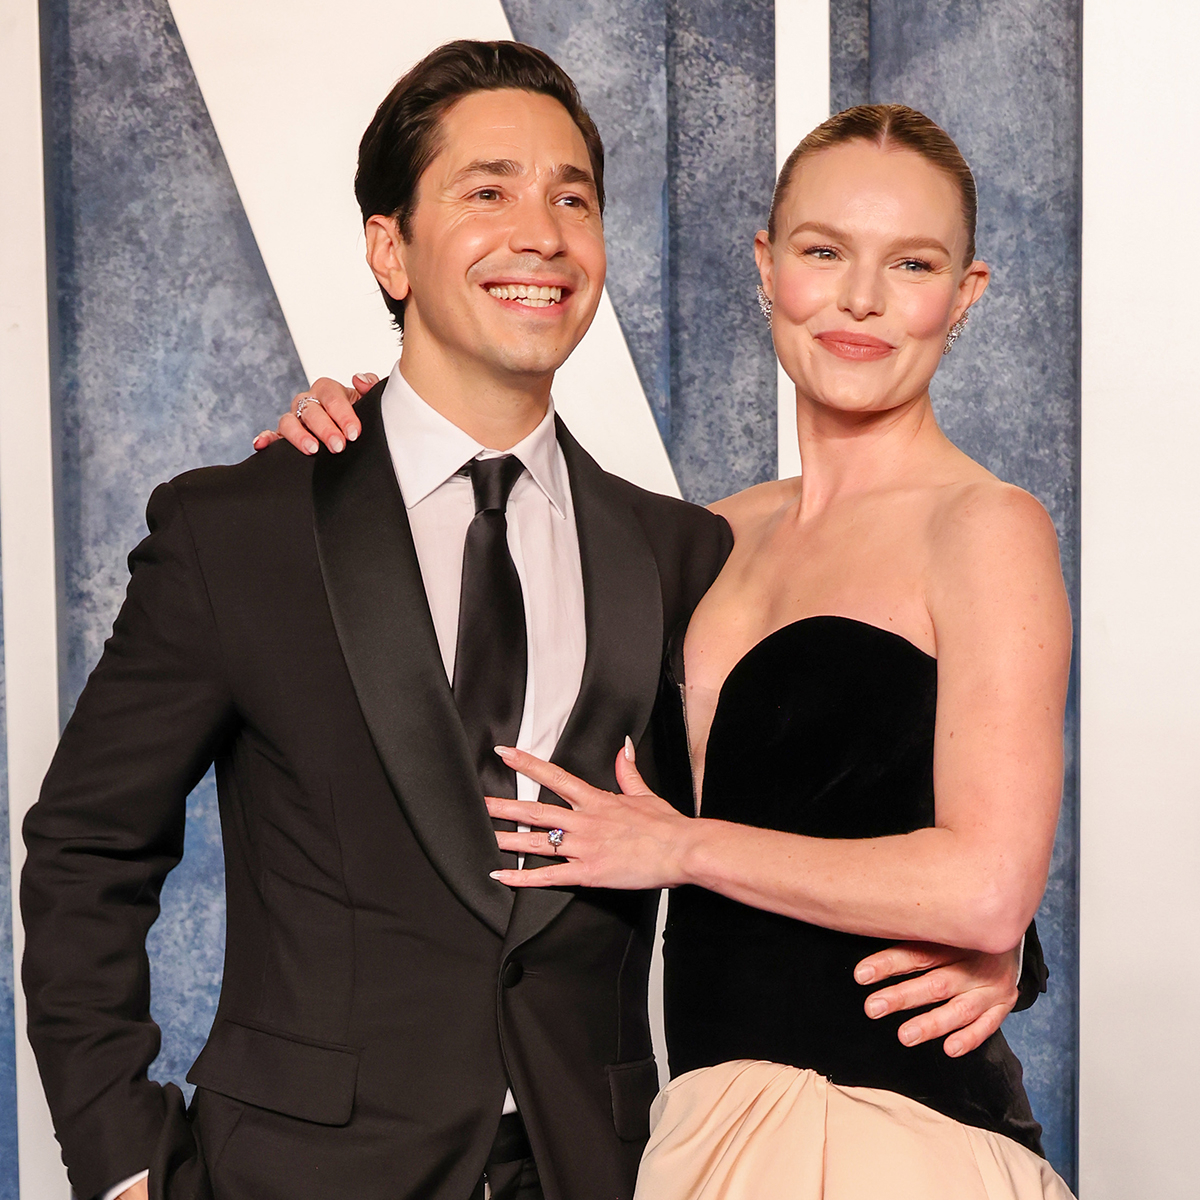 Kate Bosworth And Justin Long Spark Engagement Rumors At Oscars Party